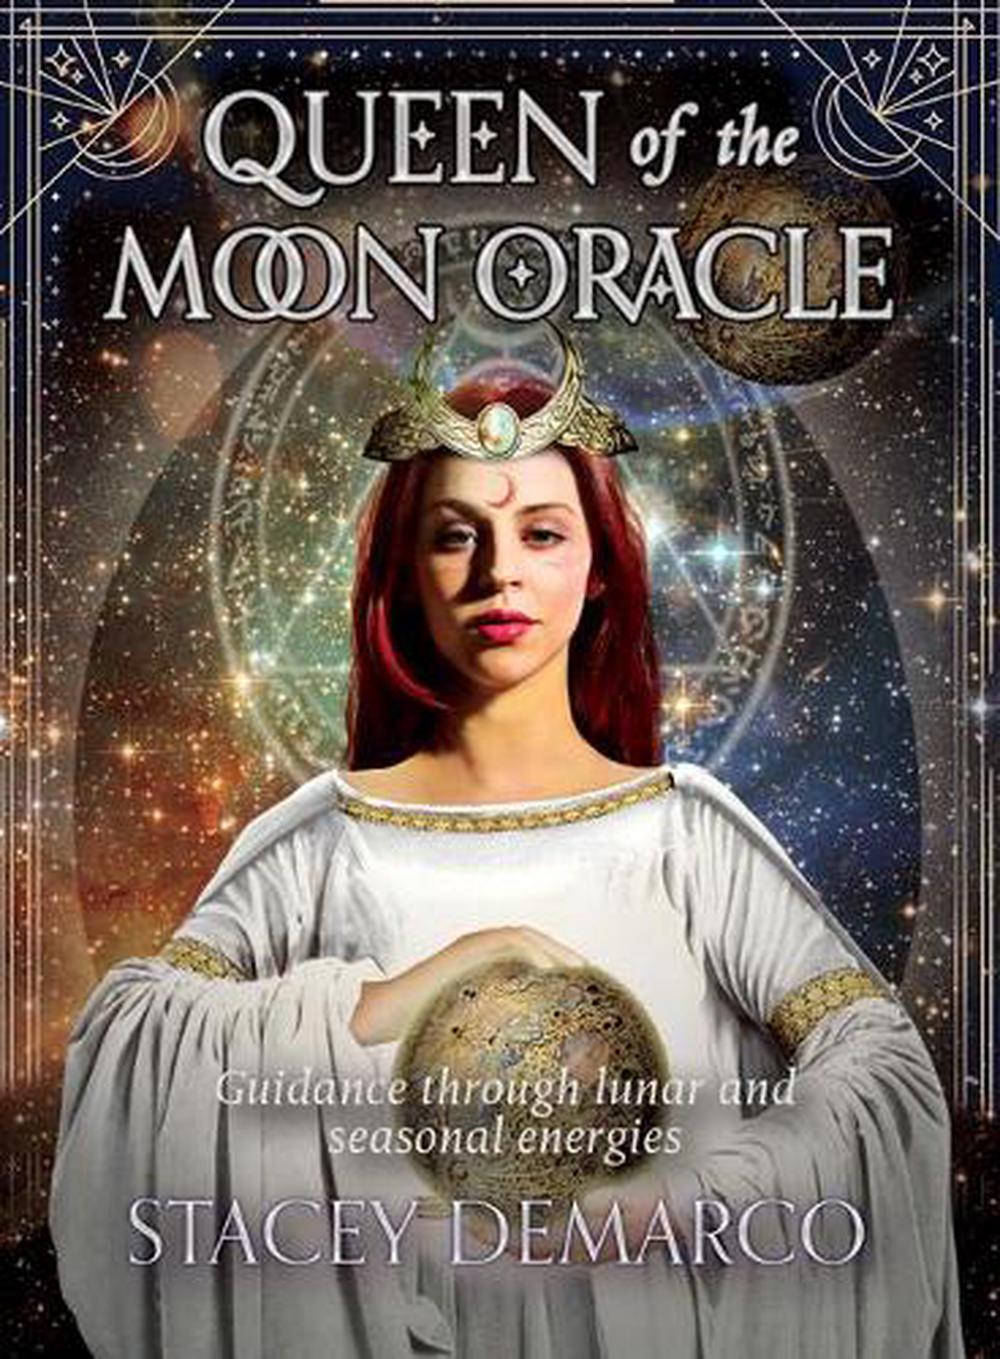 The Moon Queen by R.K. Pavia